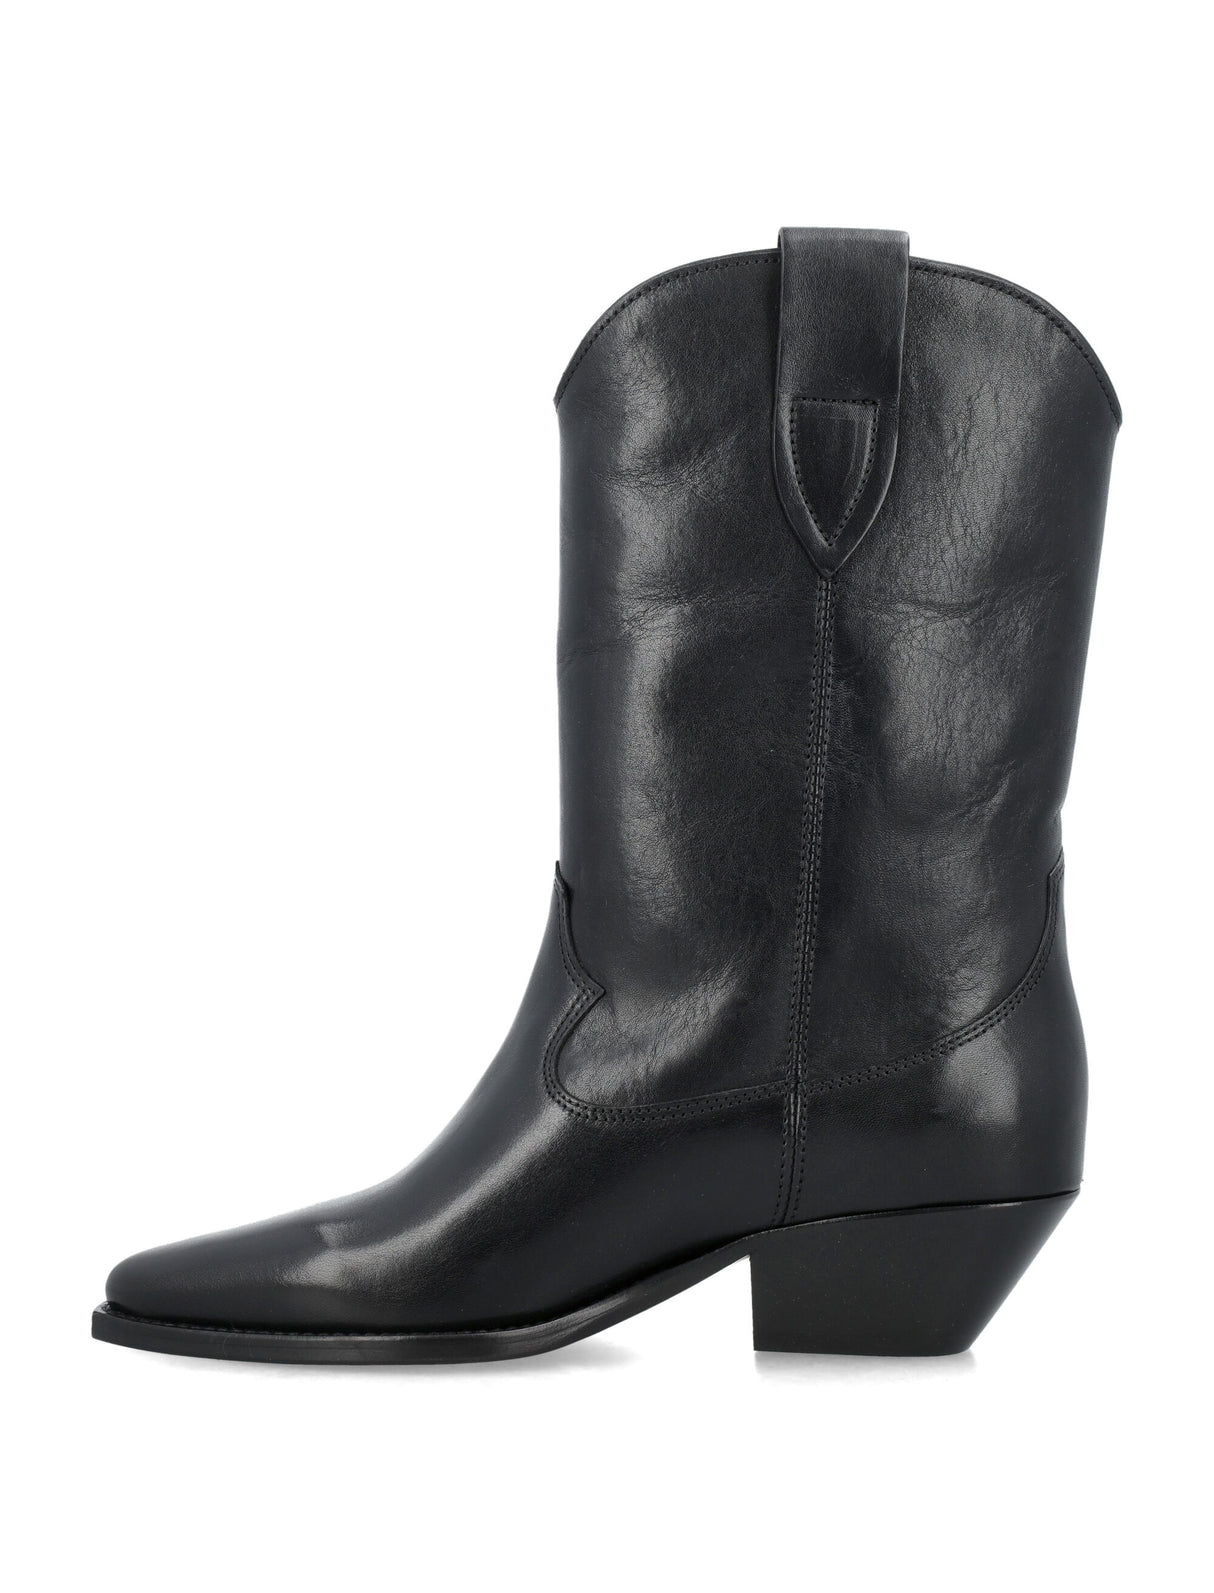 ISABEL MARANT Black Cowgirl Vibes: Pointed Toe Leather Boots